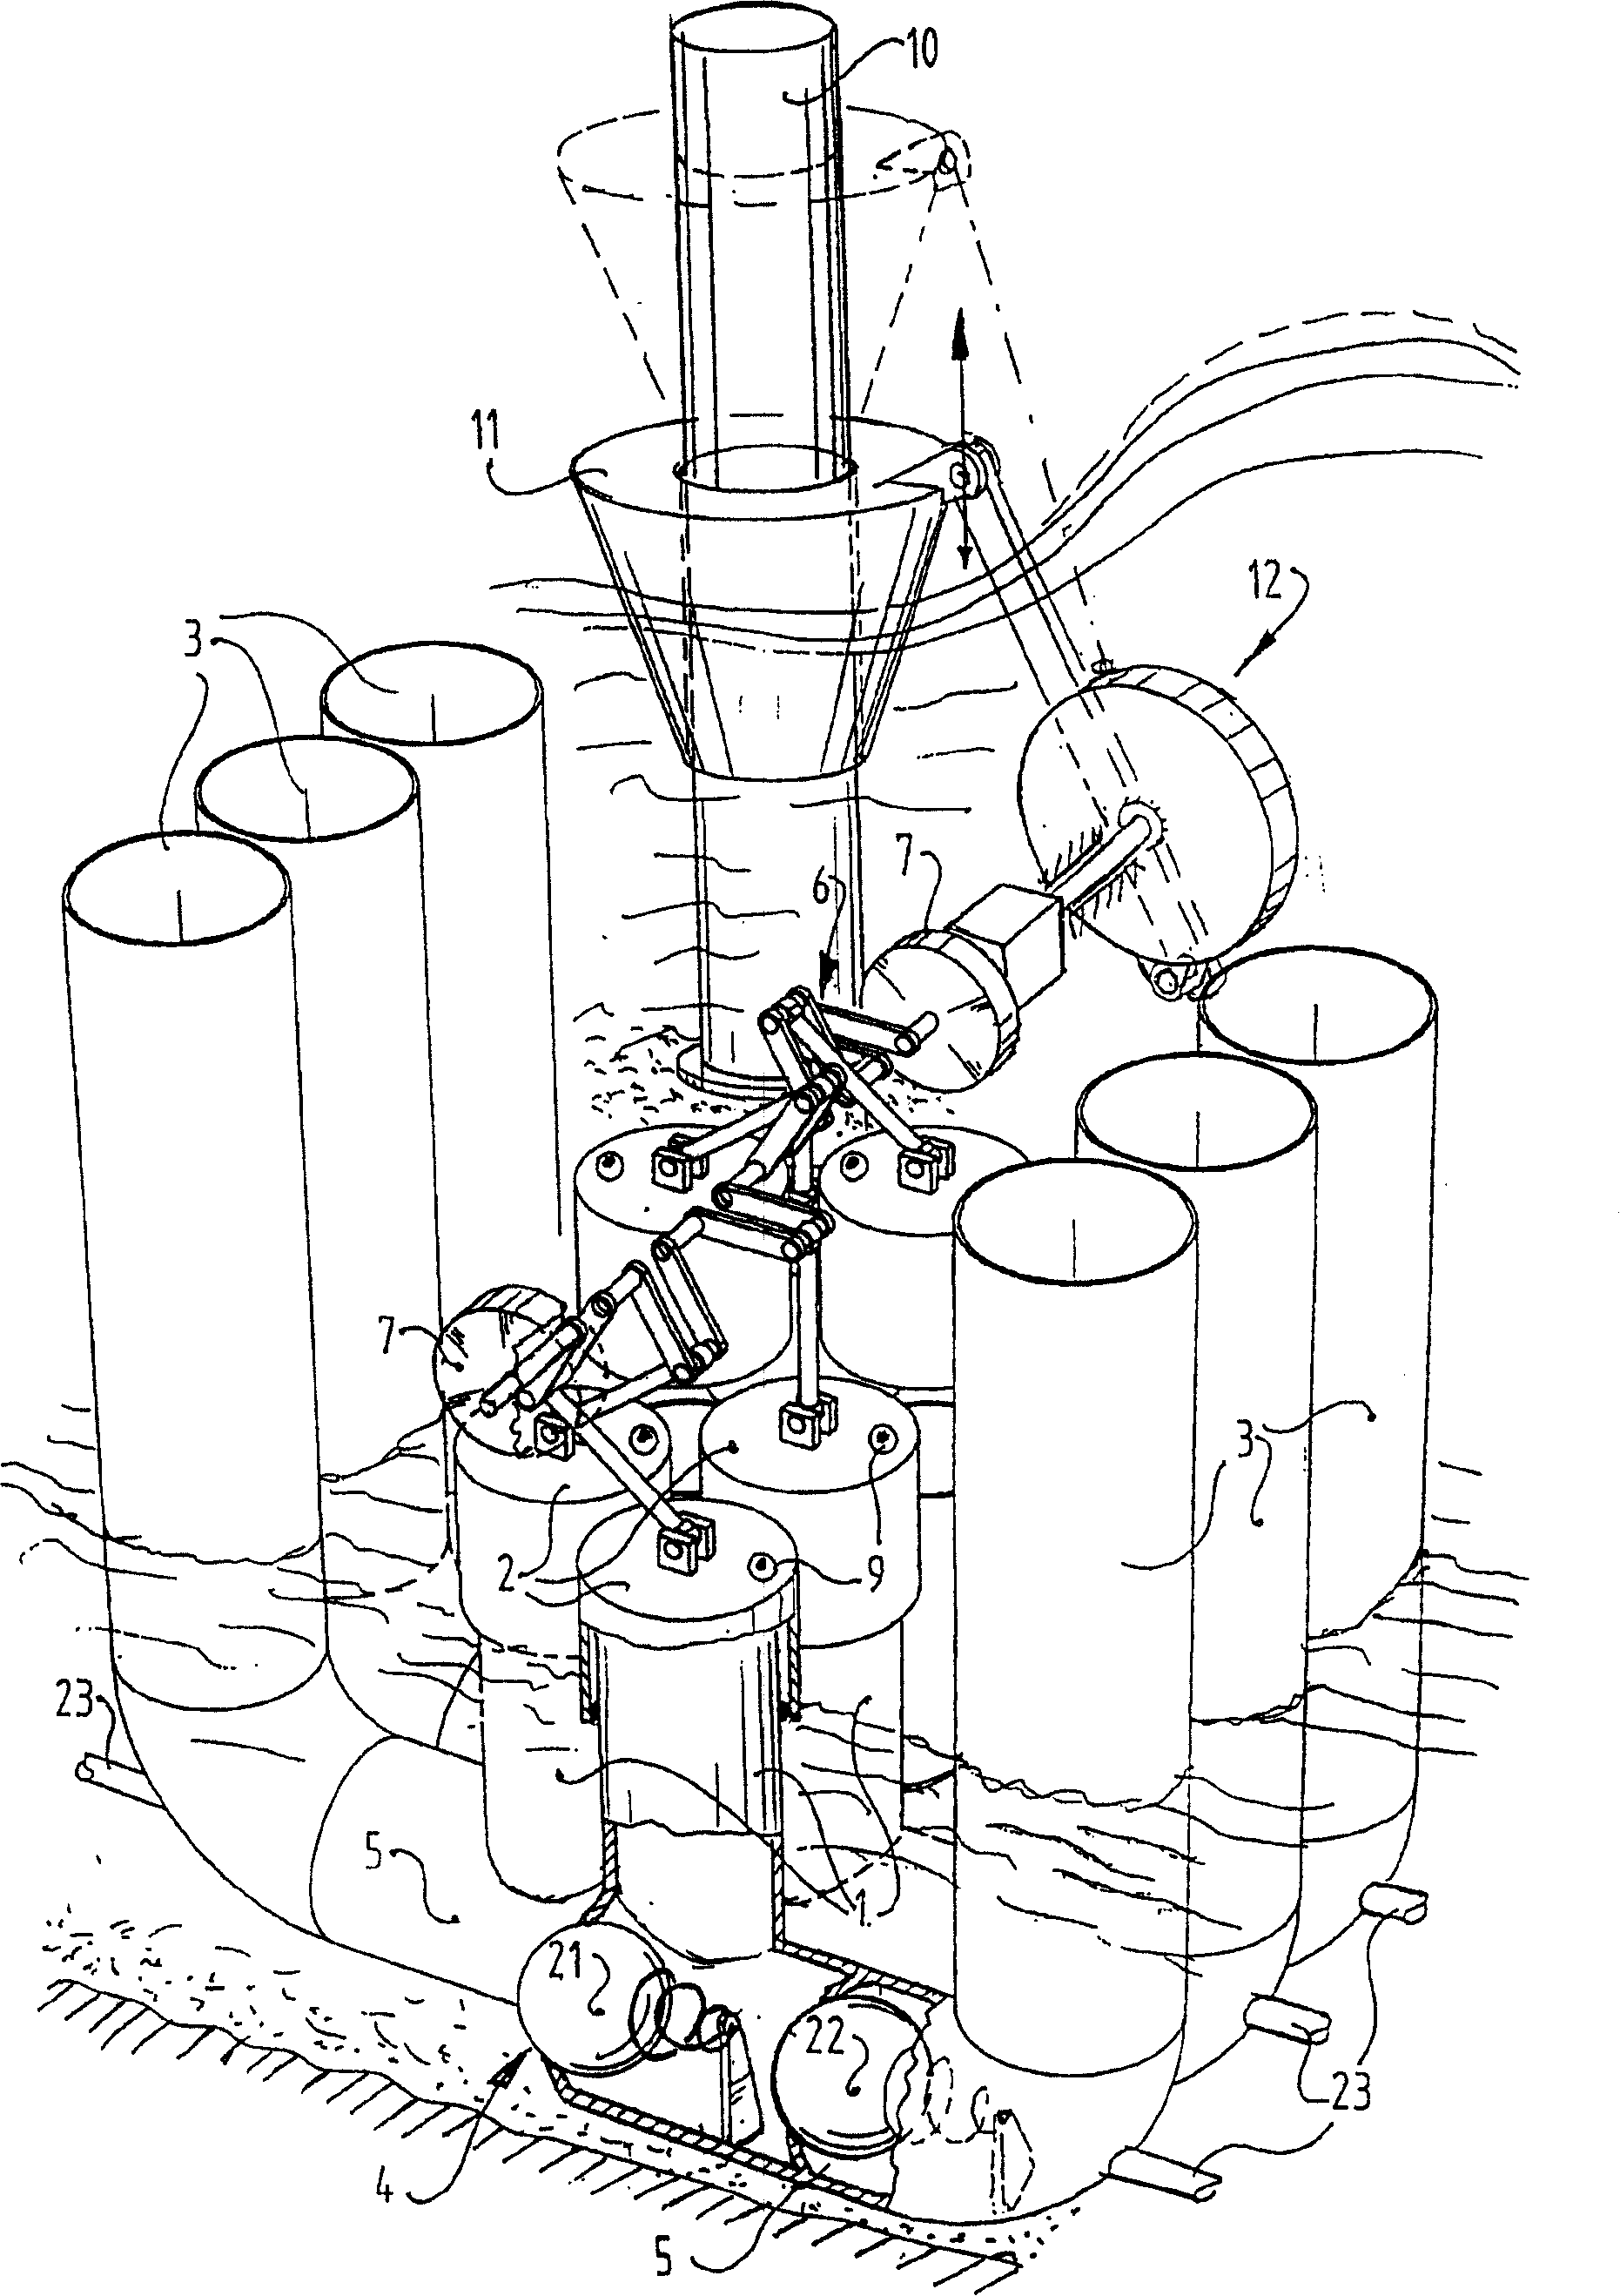 Apparatus for storage of potential energy